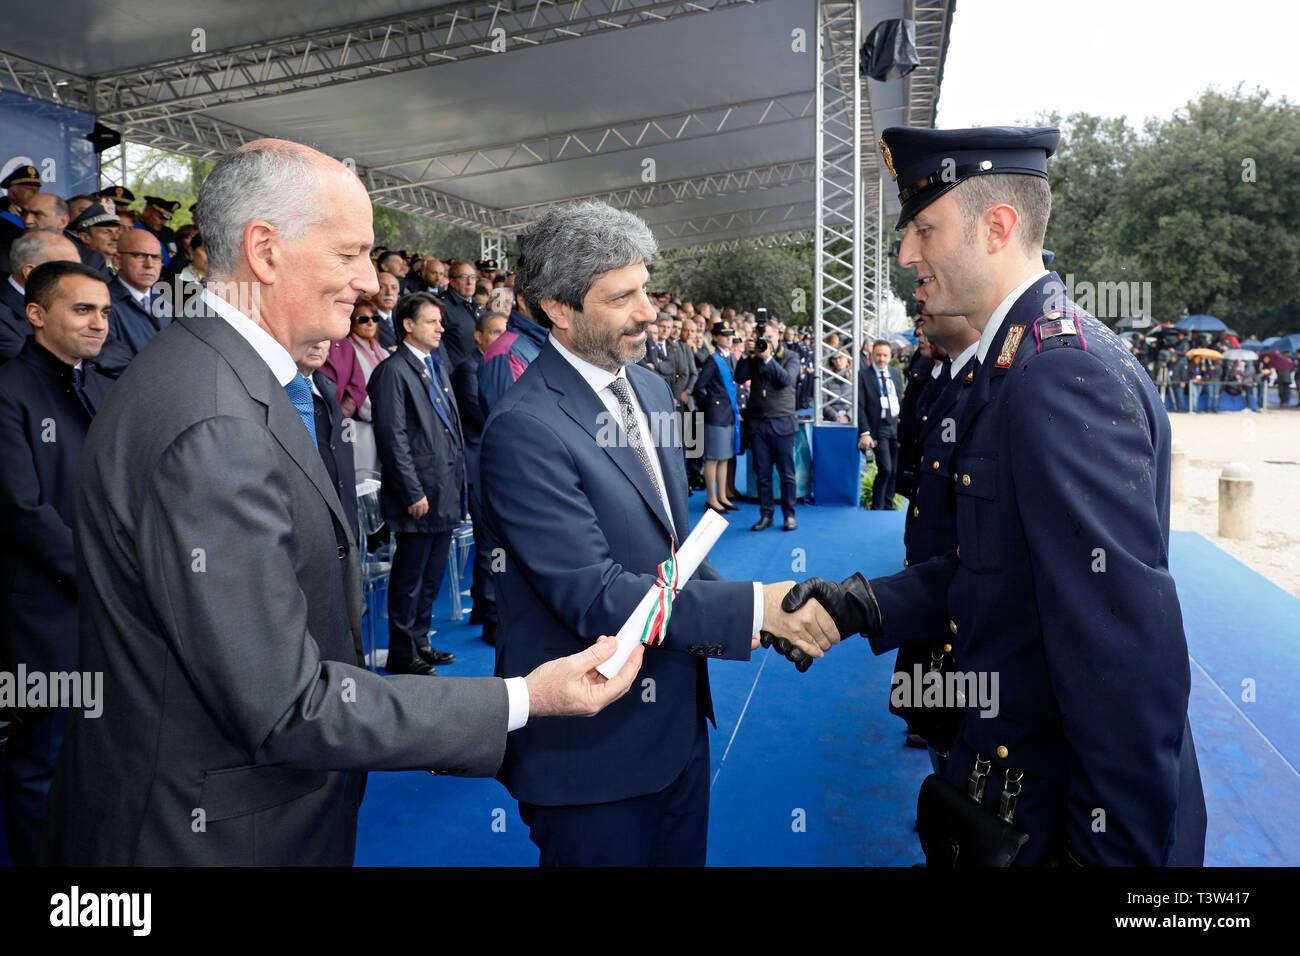 Rome, Italy - April 10, 2019: The president of the Chamber of Deputies Roberto Fico gives the medals to the deserving police officers, during the cele Stock Photo